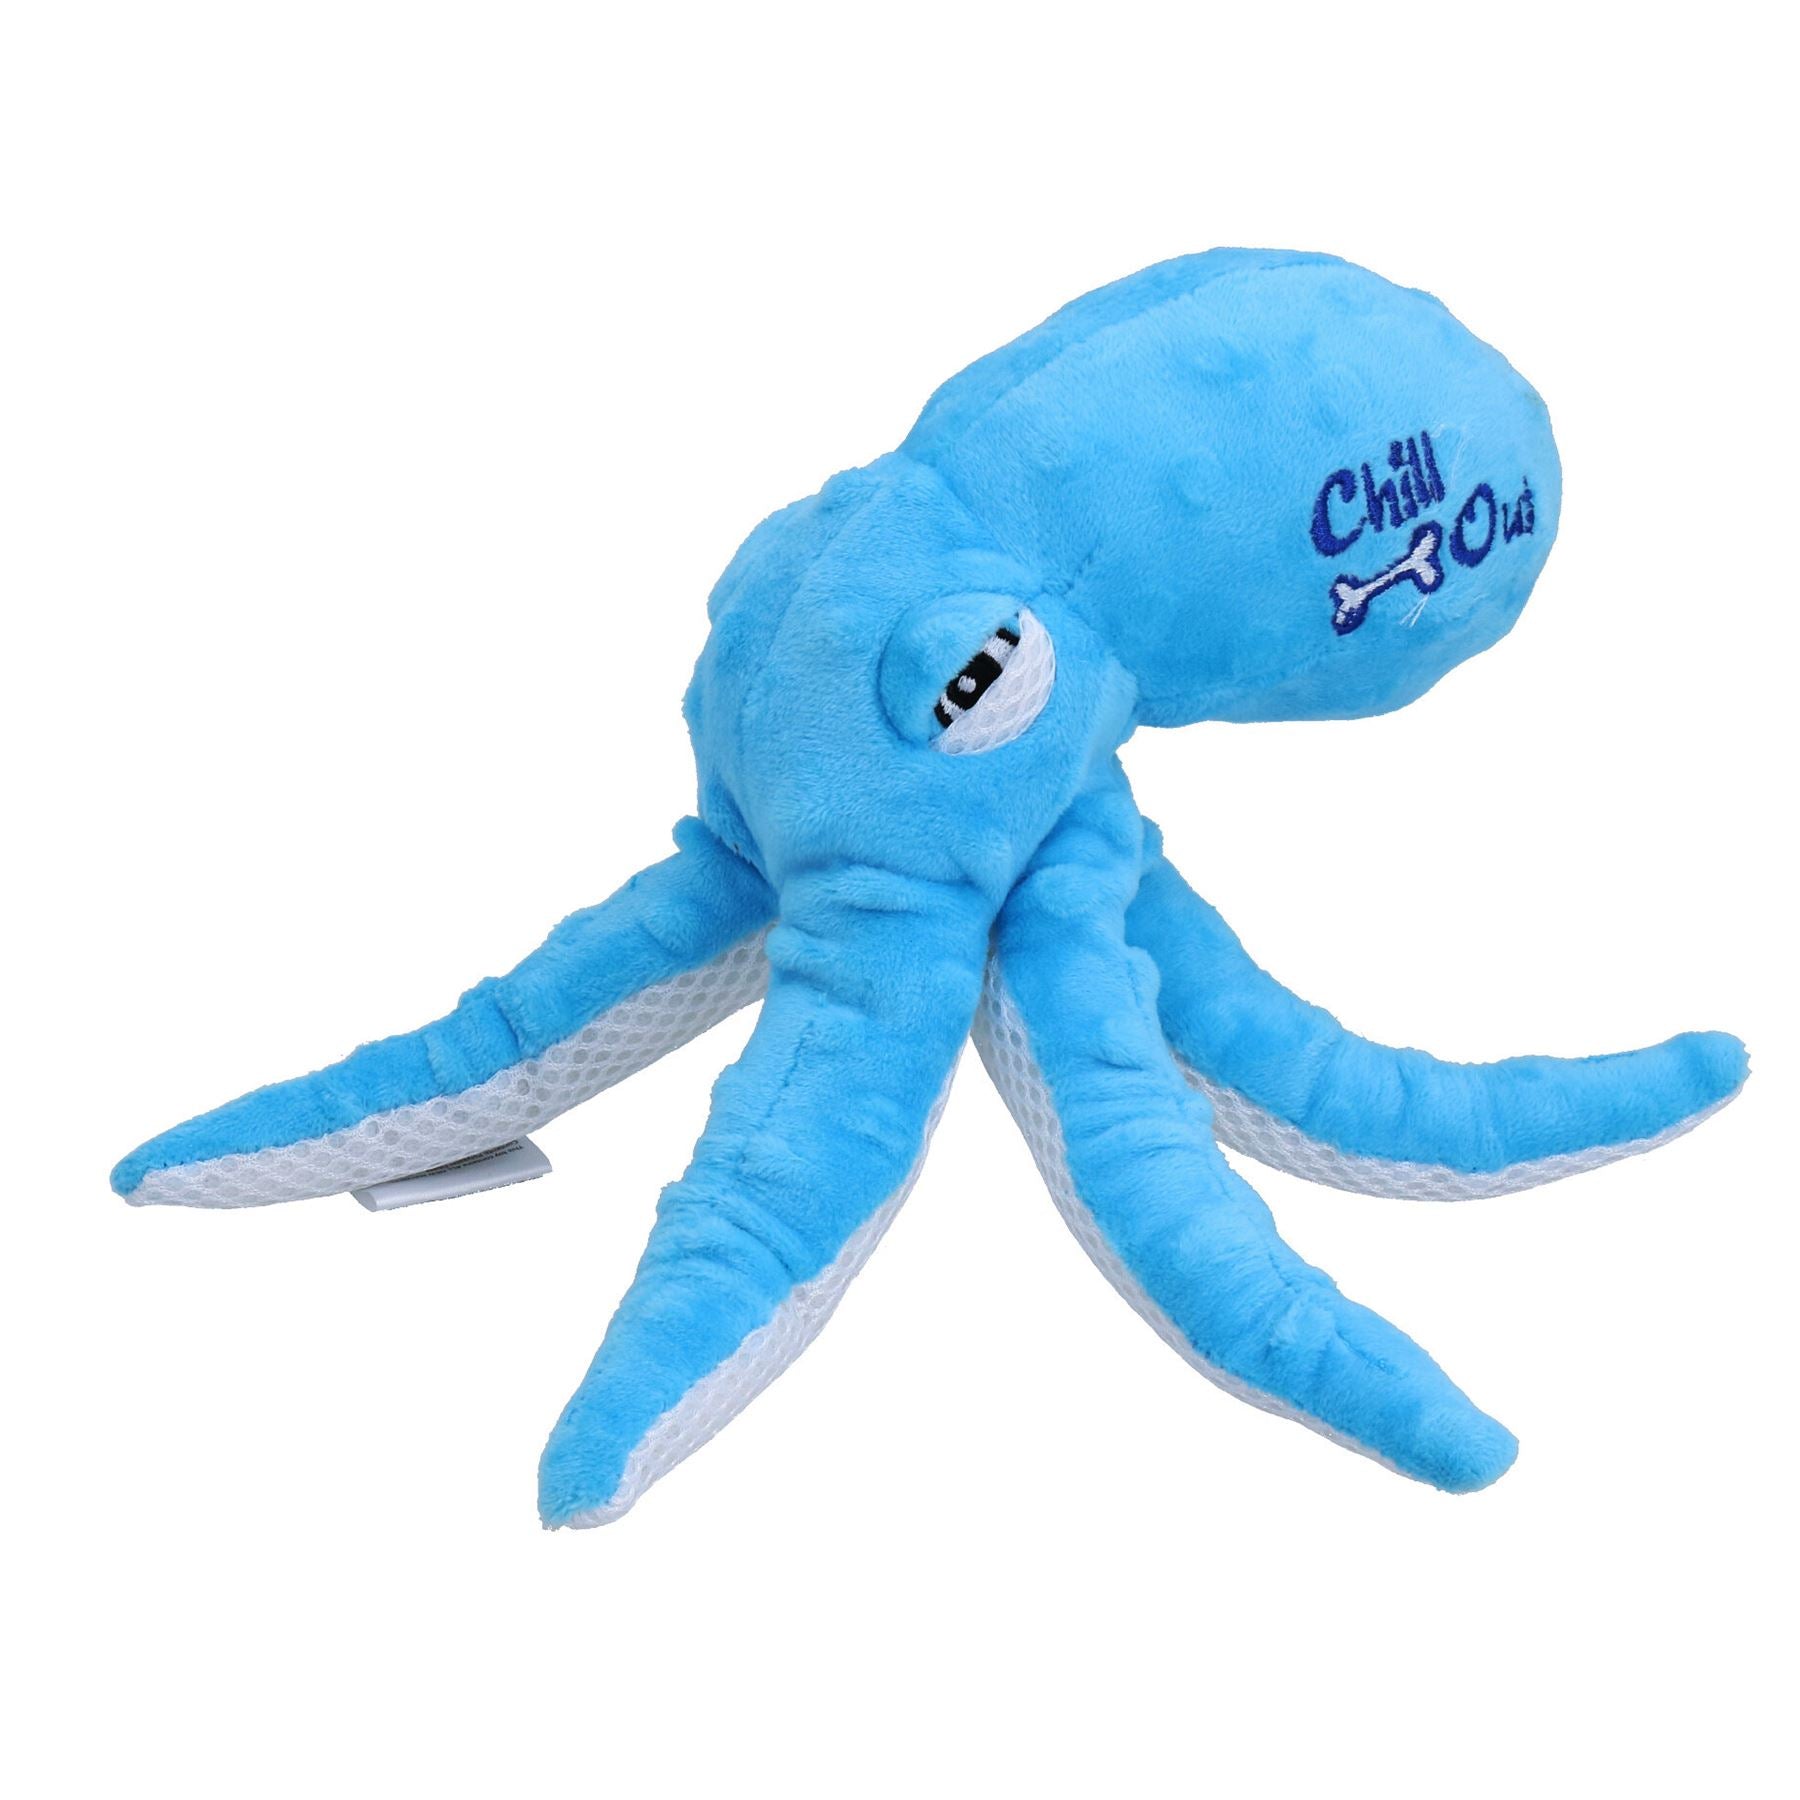 Chill Out Octopus Dog Plush Hydration Cooling Summer Play Toy Home Pet Toy